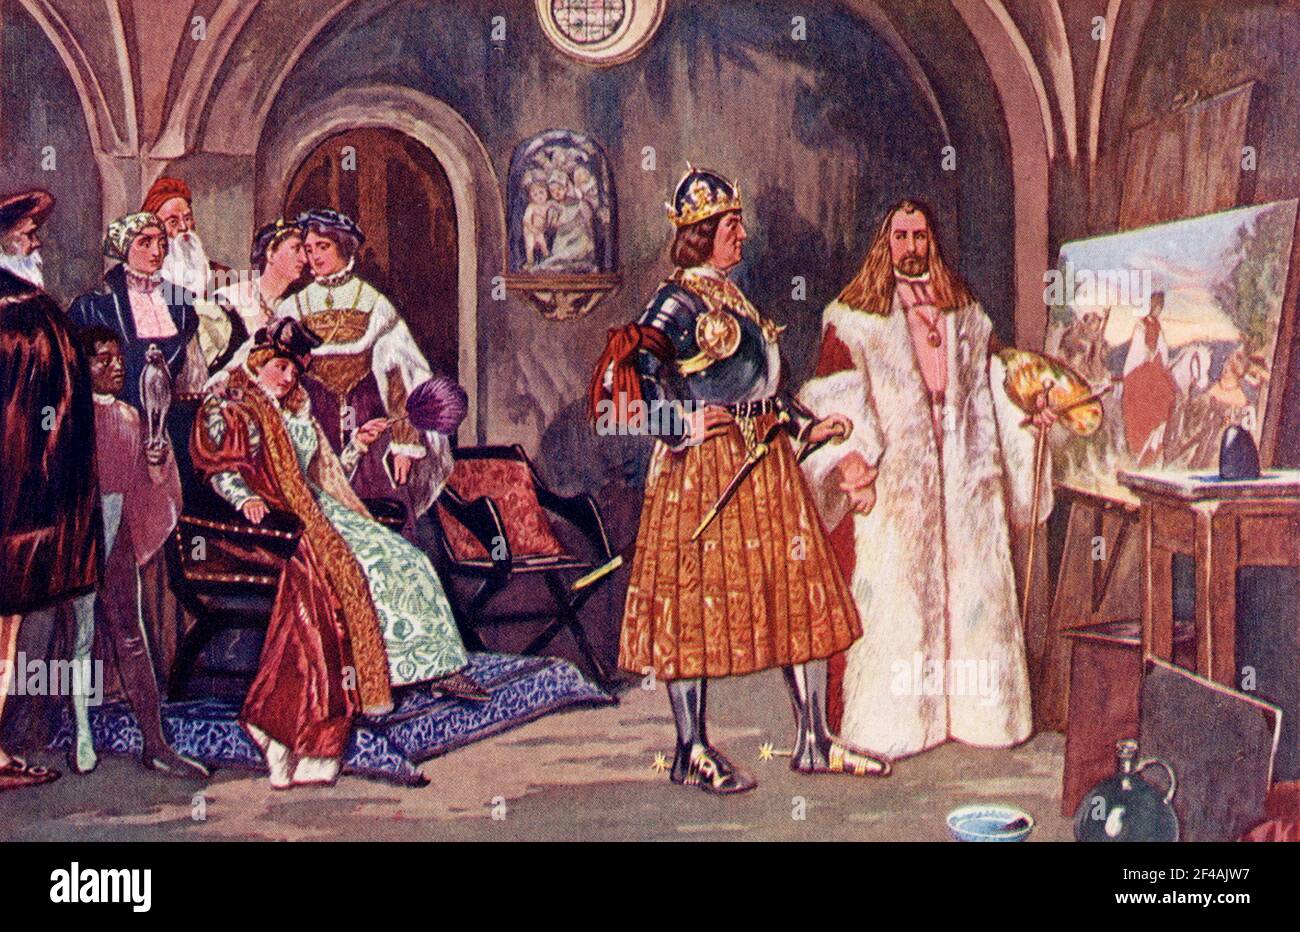 The caption for this 1902 illustration reads: Emperor Maximilliam visits studio of Albrecht Durer. Durer (1471-1528), the most famed of German artists, was a great favorite of the Emperor Maximilian, who employed him on a series of brilliant sketches, celebrated in around 1900 as 'the triumph of Maximilian.' Stock Photo